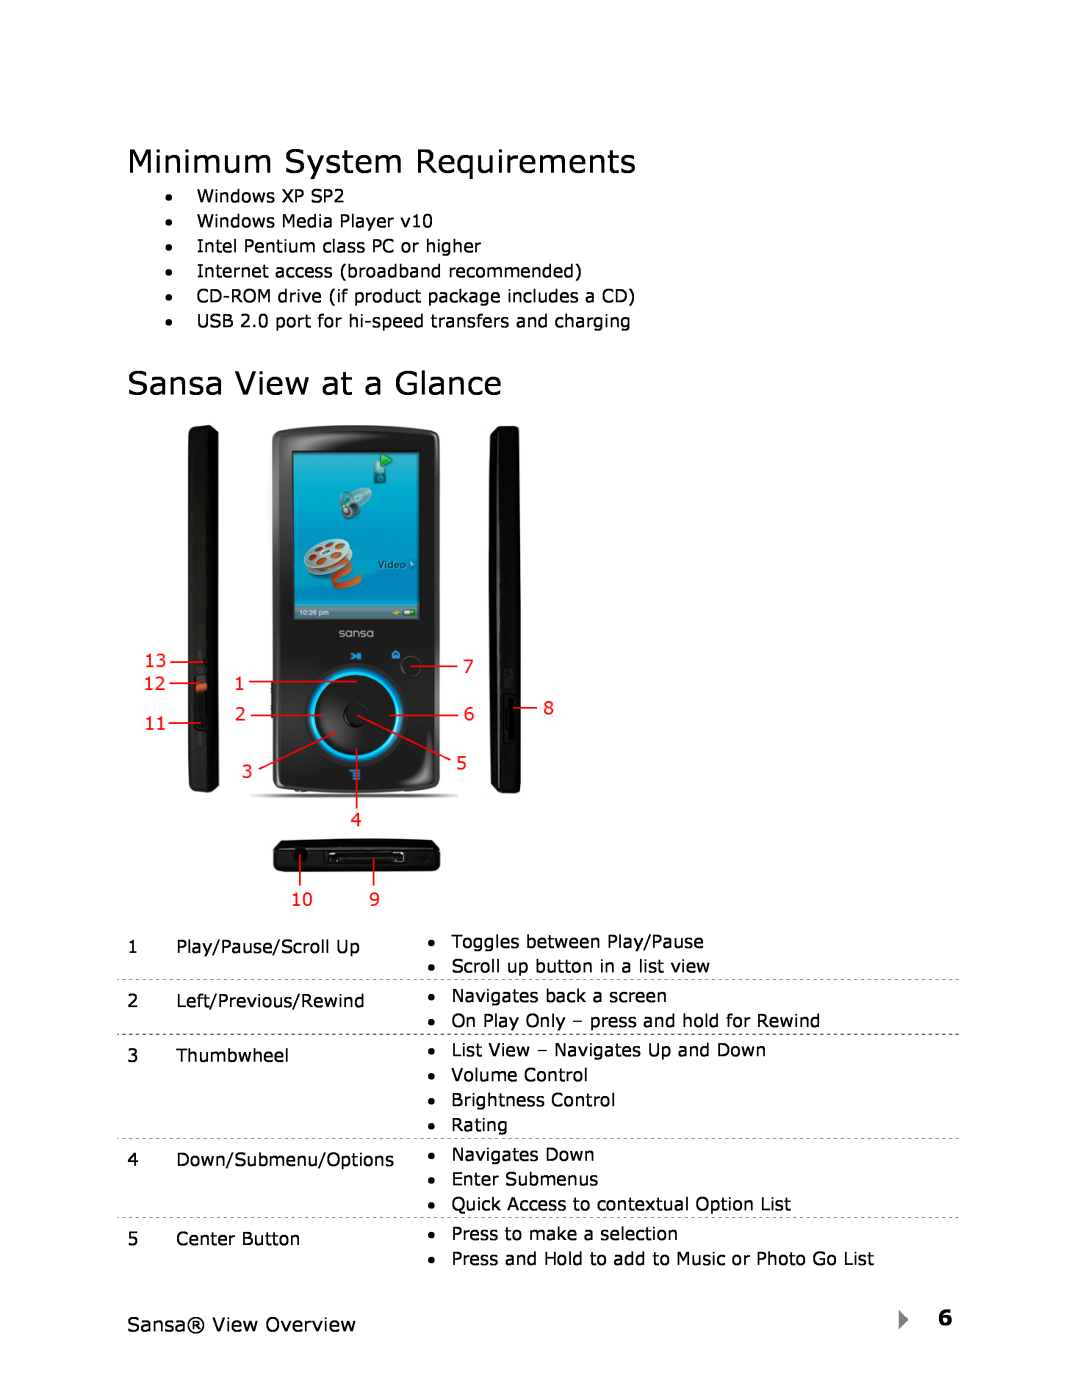 SanDisk user manual Minimum System Requirements, Sansa View at a Glance 